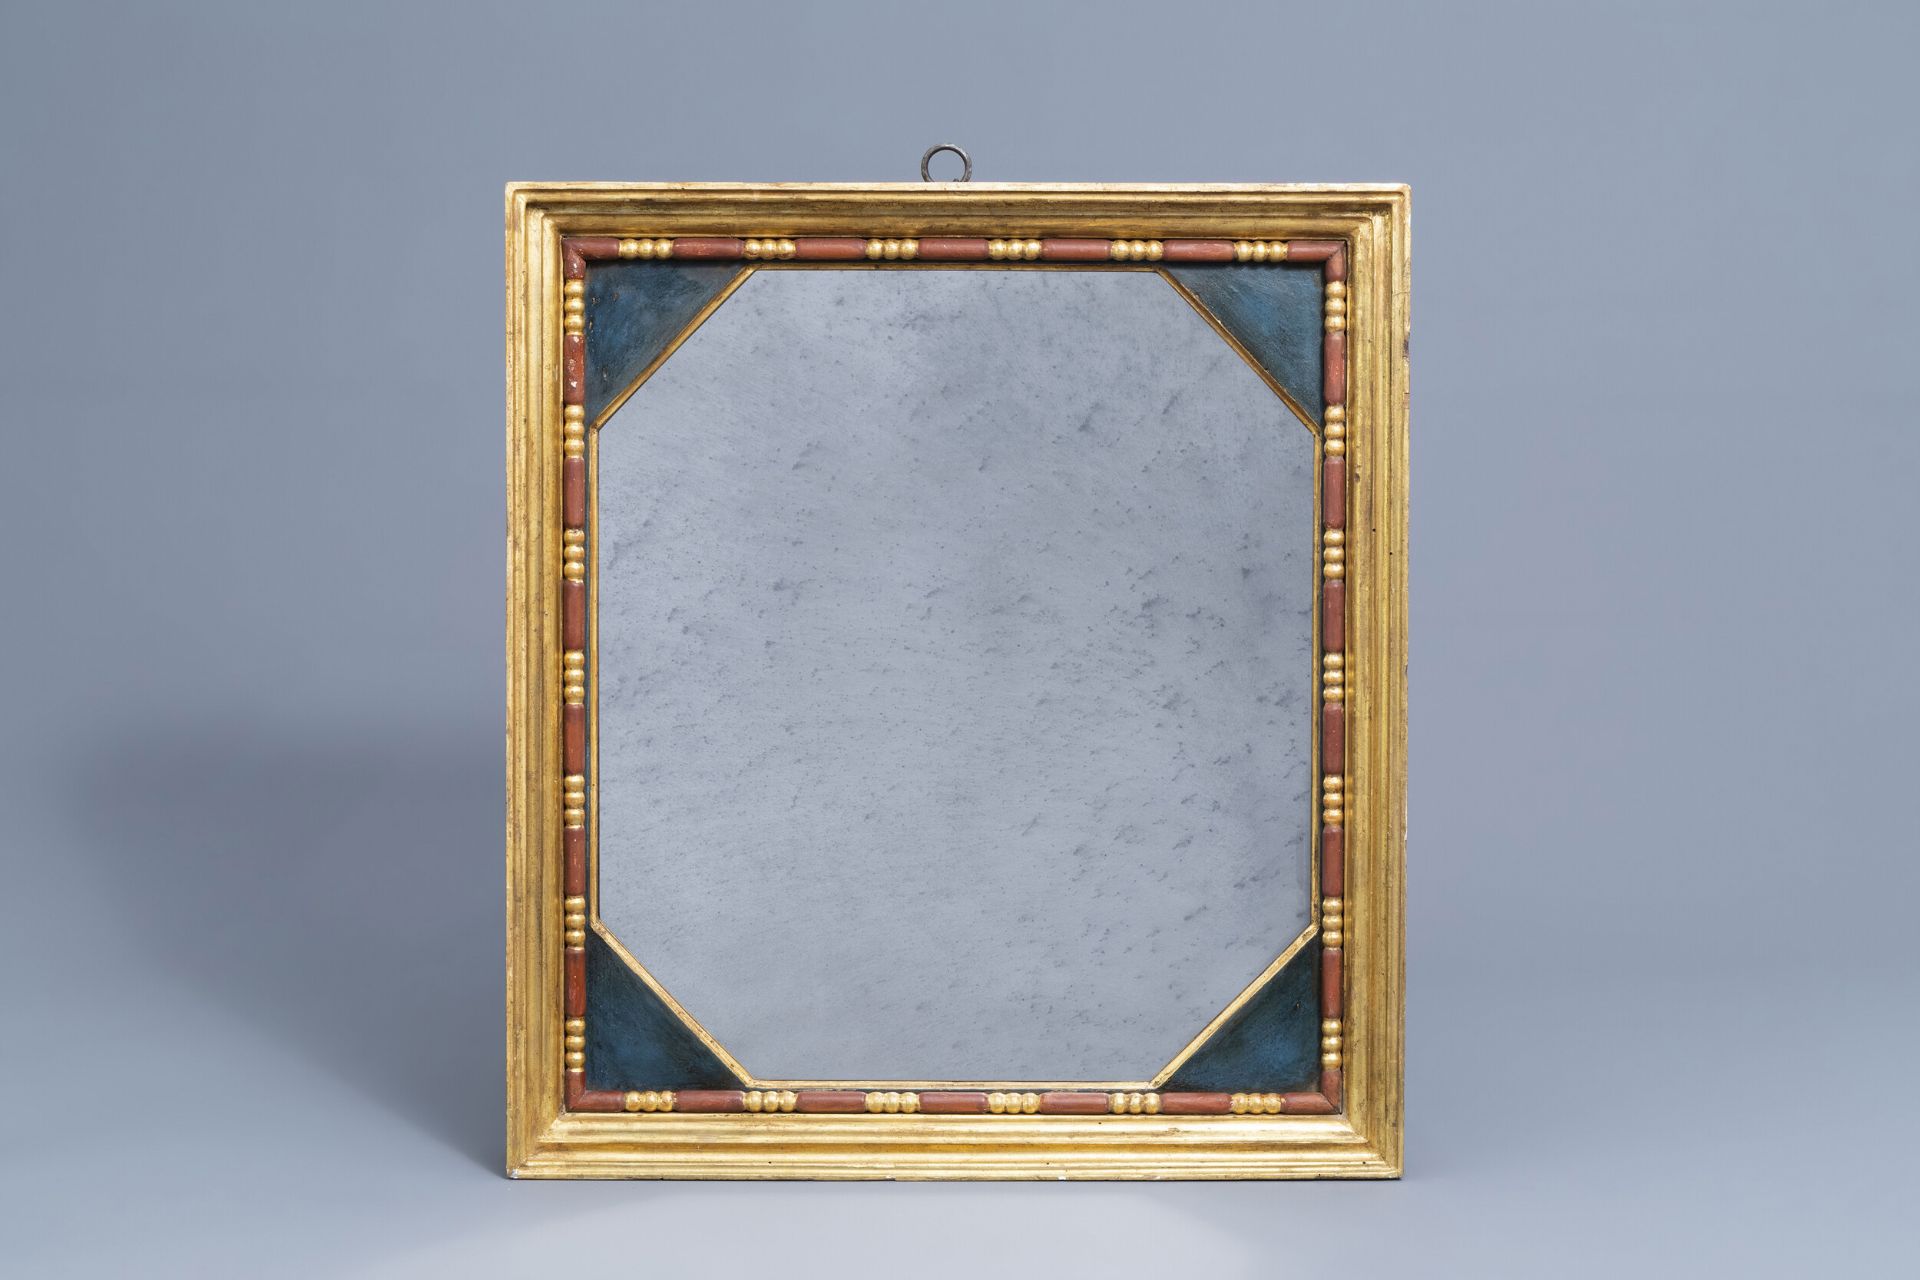 An octagonal mirror in a gilt and polychrome decorated wooden frame, 20th C.